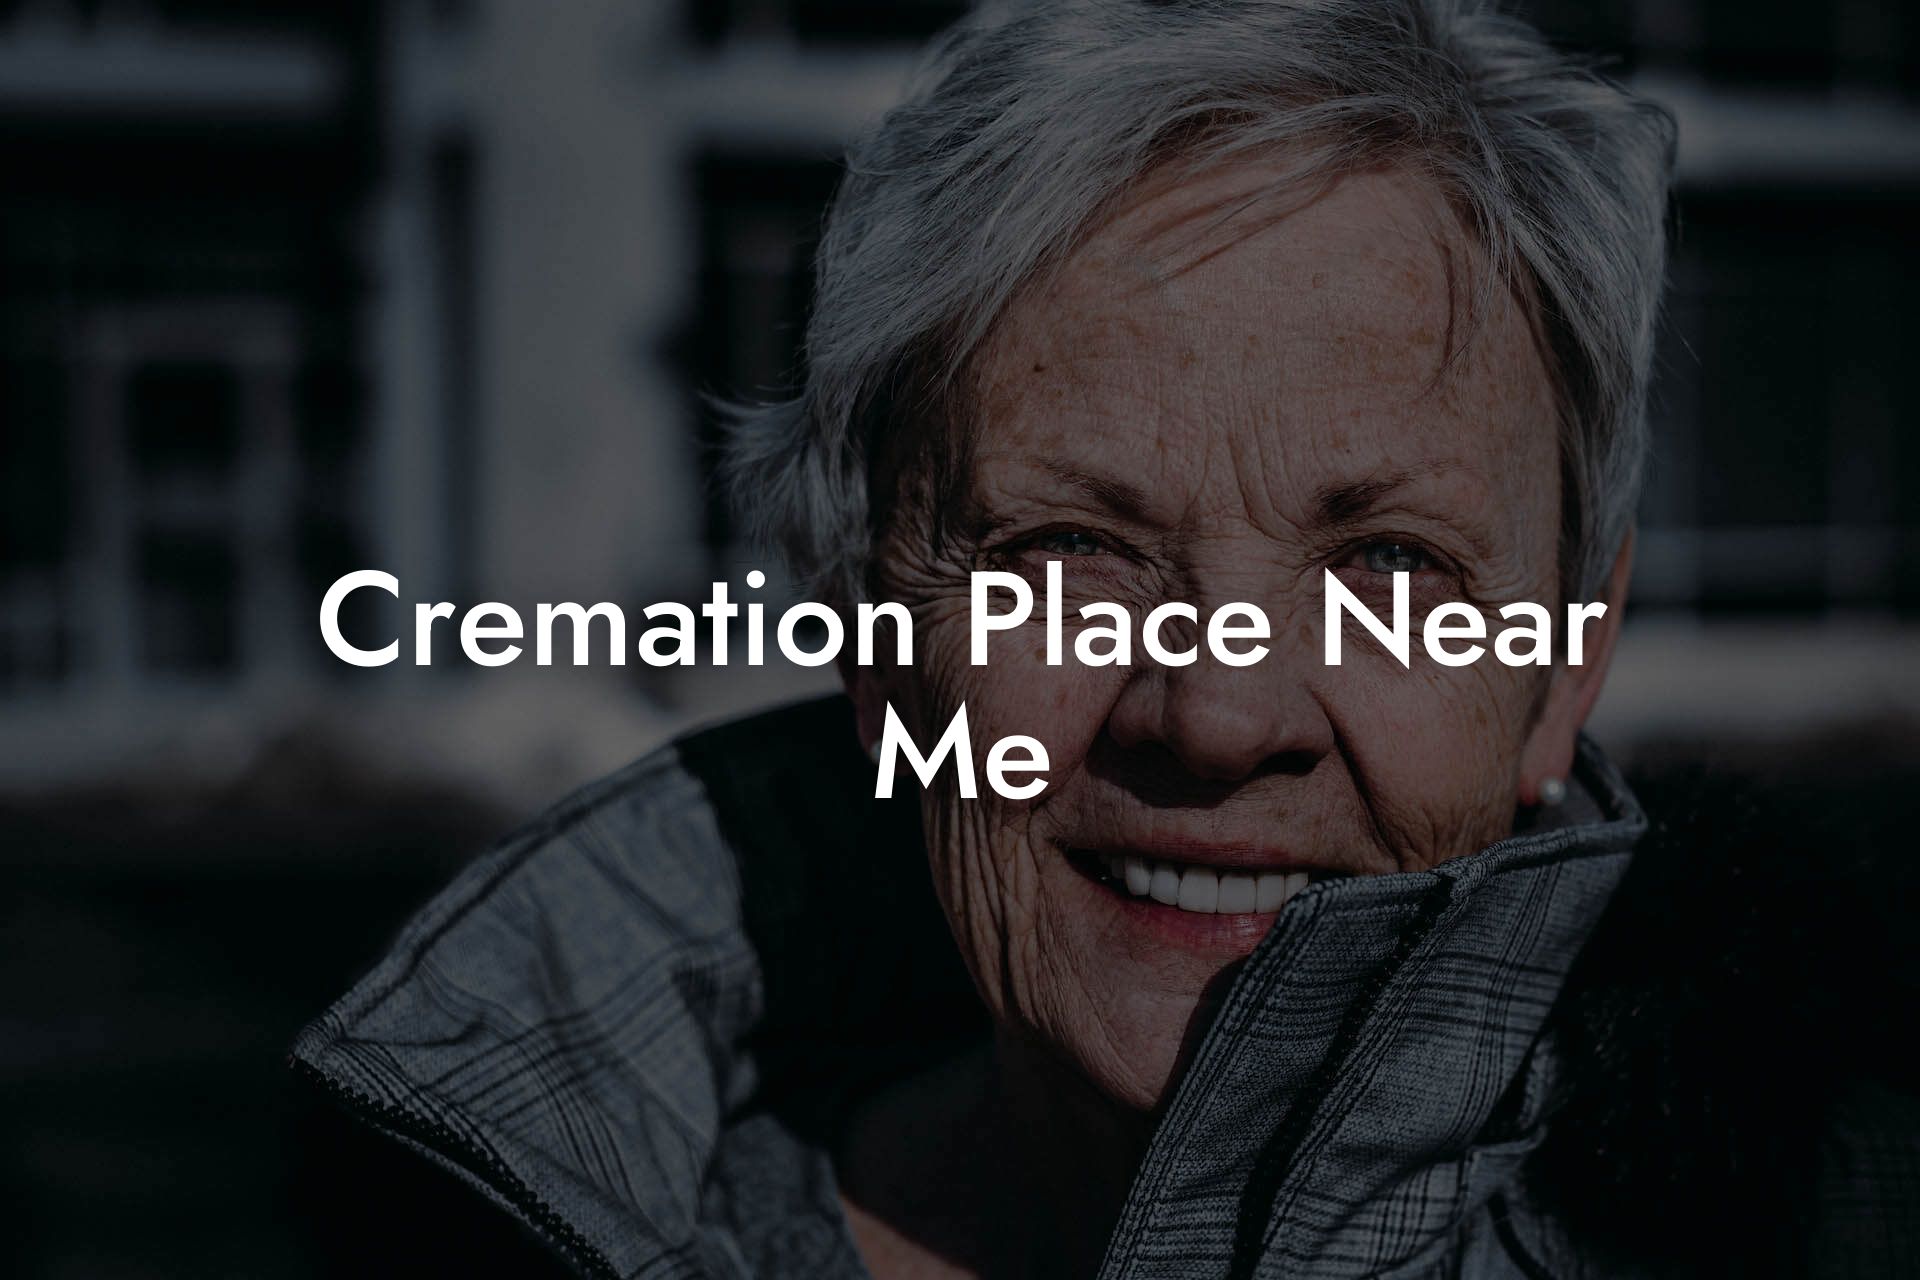 Cremation Place Near Me